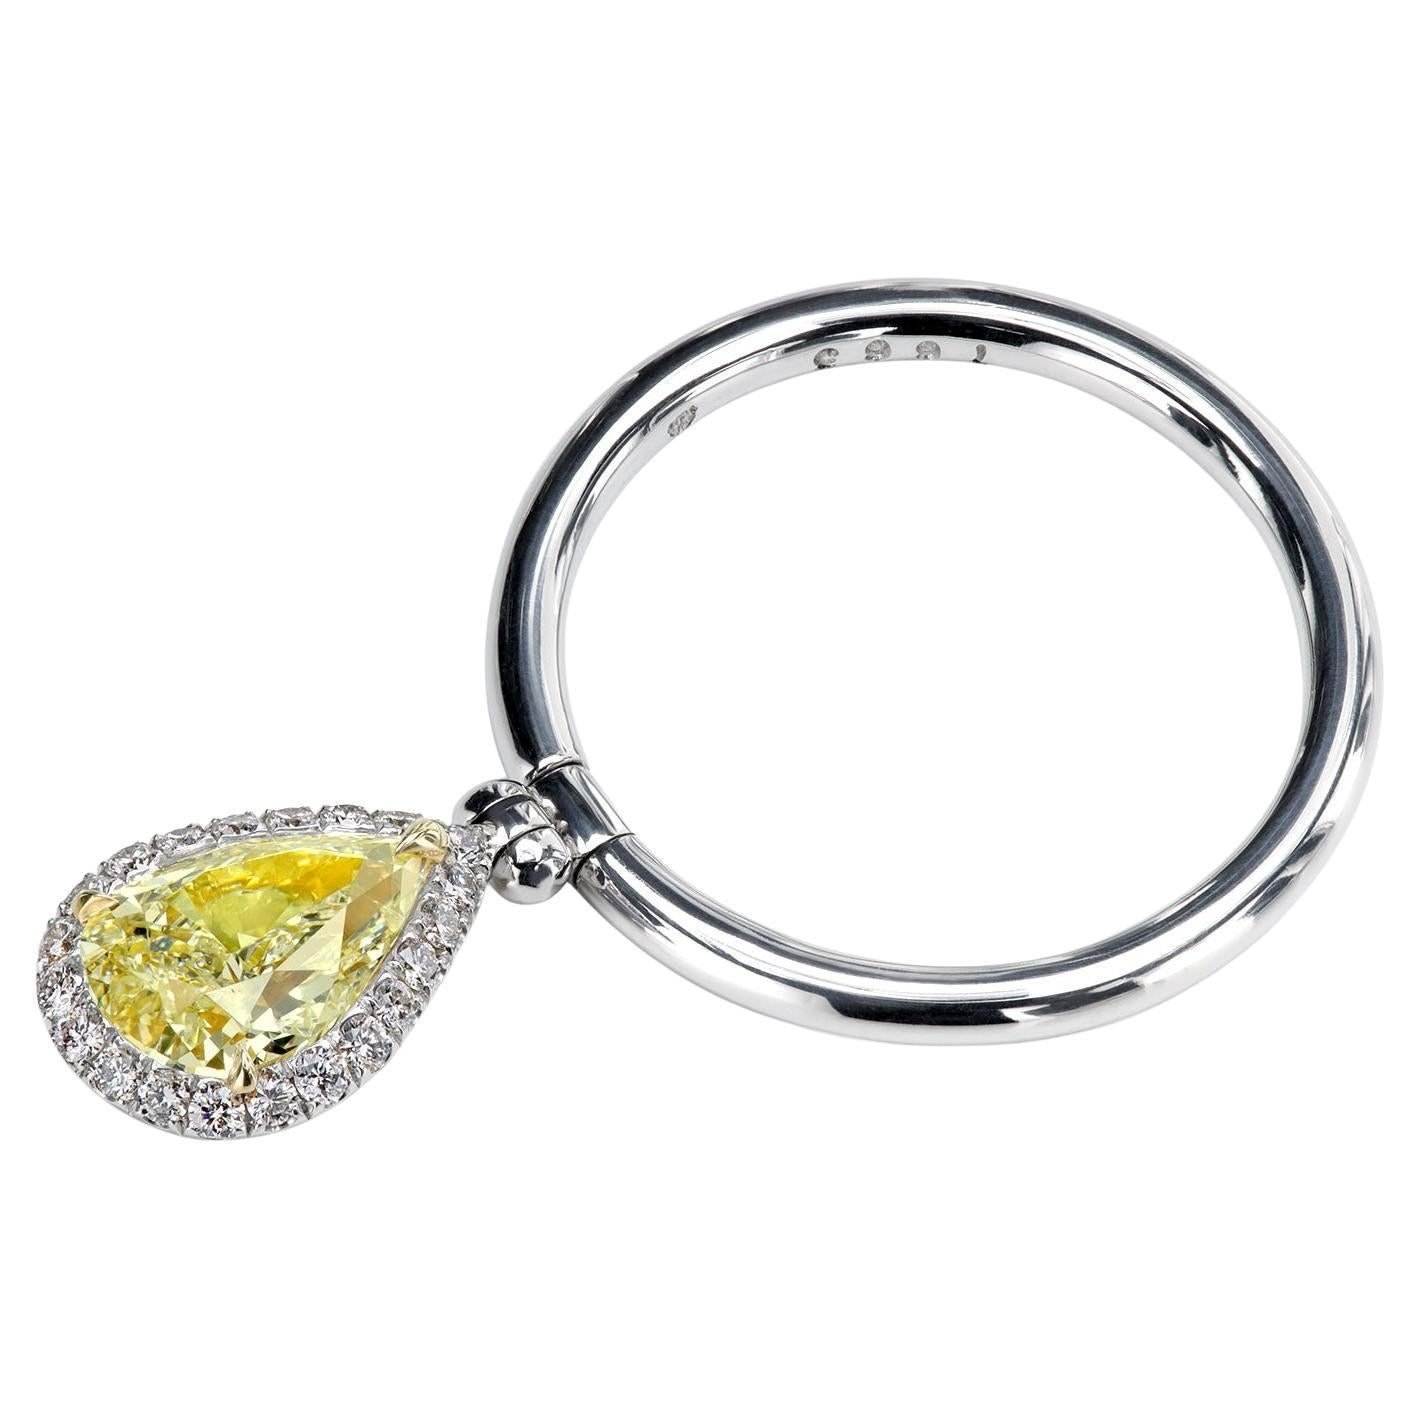 A charming 1.03-carat fancy yellow diamond in a micro pave halo pivoting on a clean, smooth platinum shank. With micro pave on both sides to enhance the experience, the exclusive Leon Mege double-sided reversible ring is designed to impress and